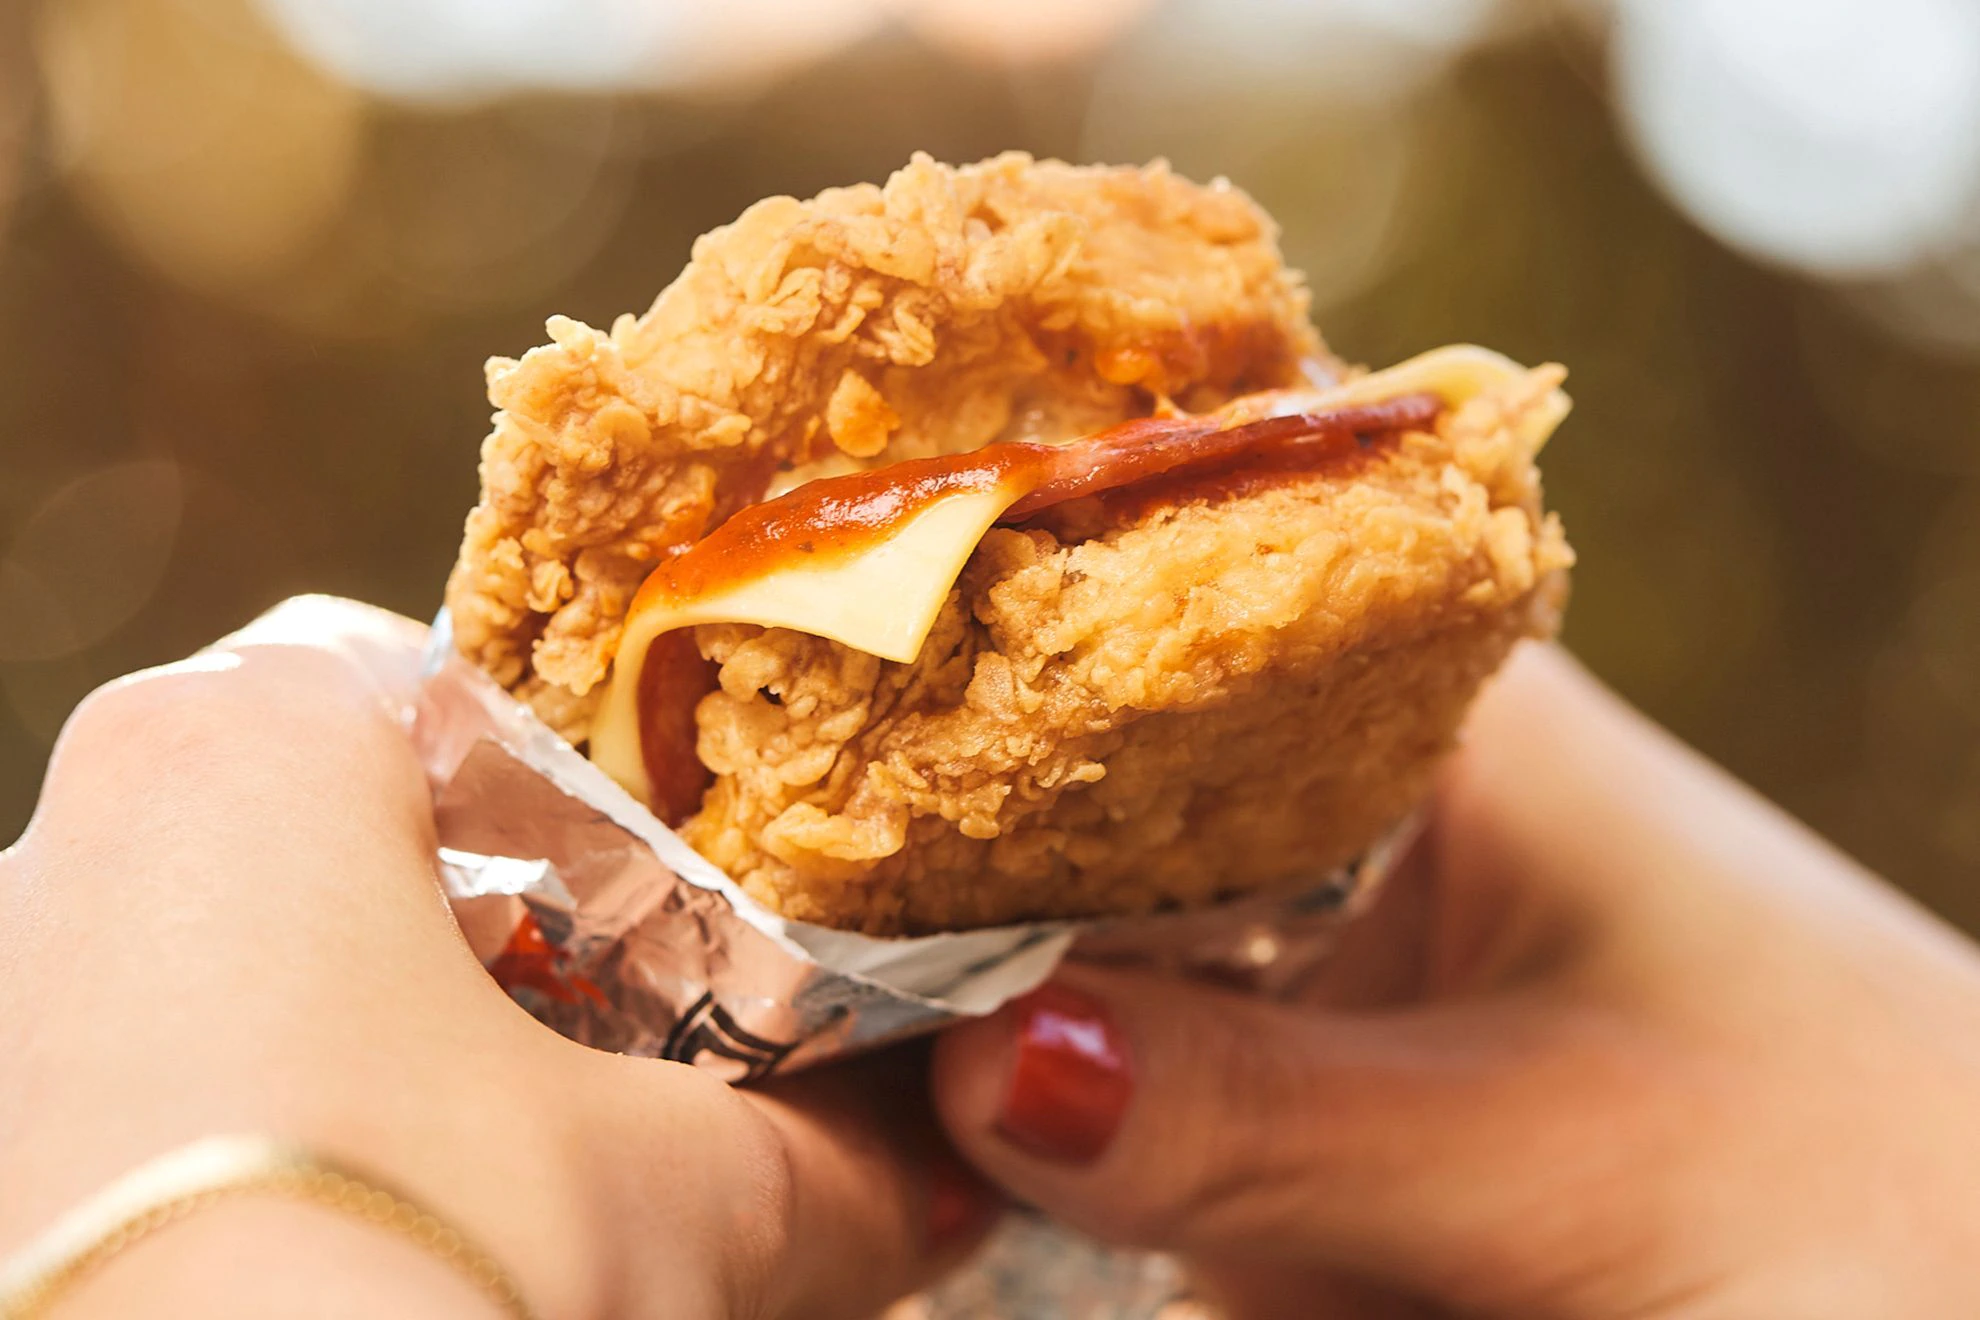 What the hell!  KFC Australia is making news by introducing the comfort-food mashup of pizza and fried chicken that will be available at KFC locations across Australia. 